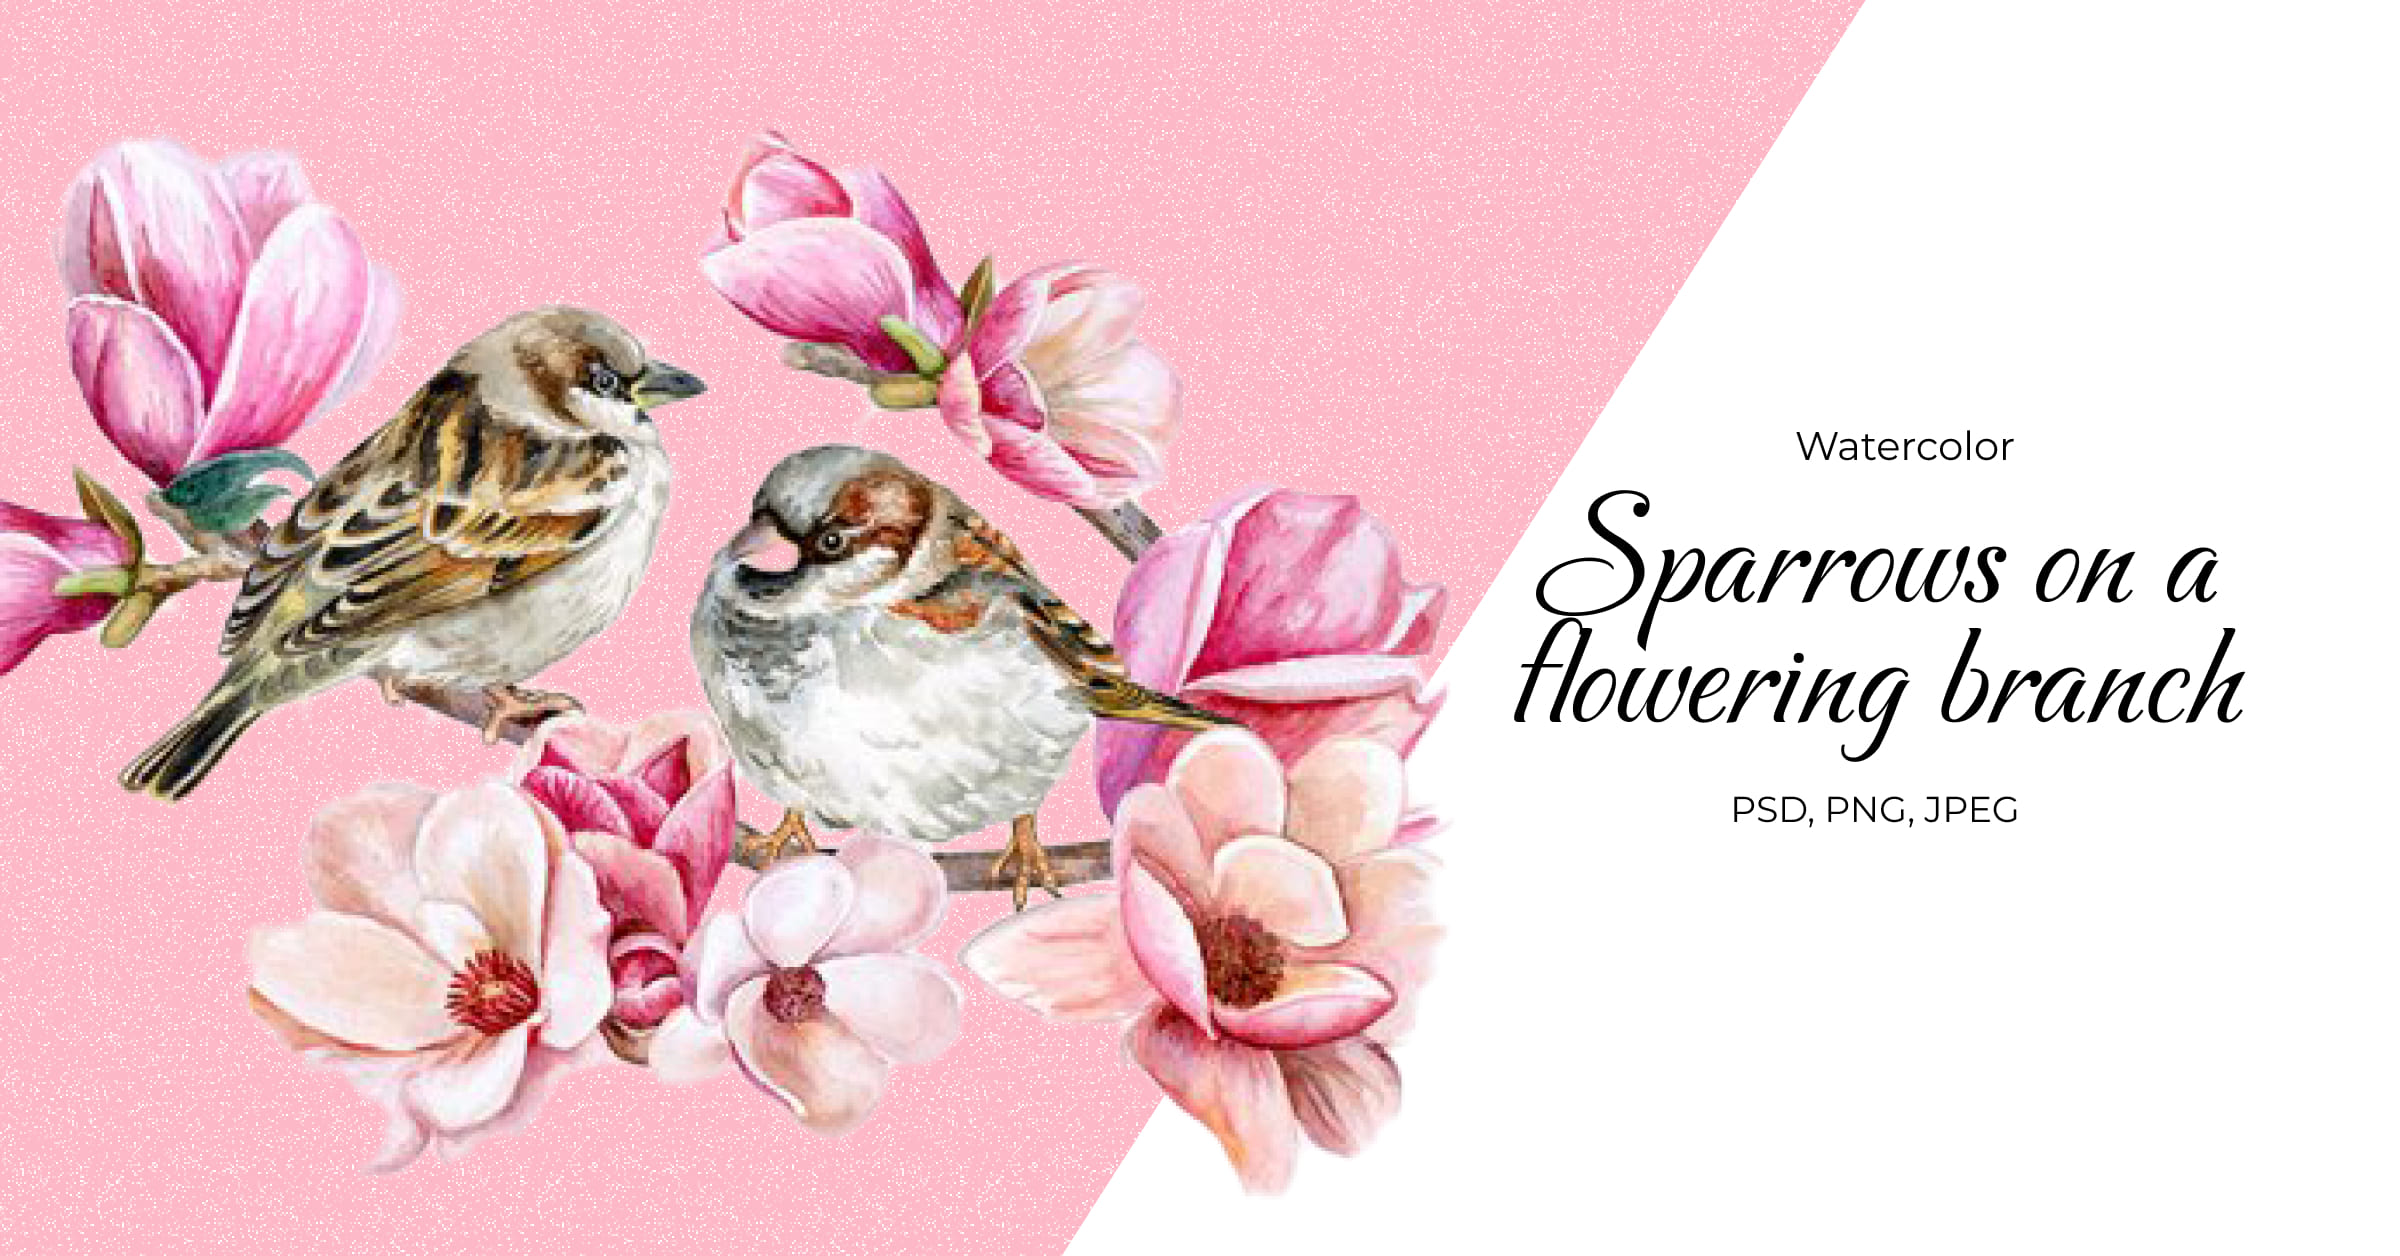 Sparrows on a flowering branch - Facebook page preview.